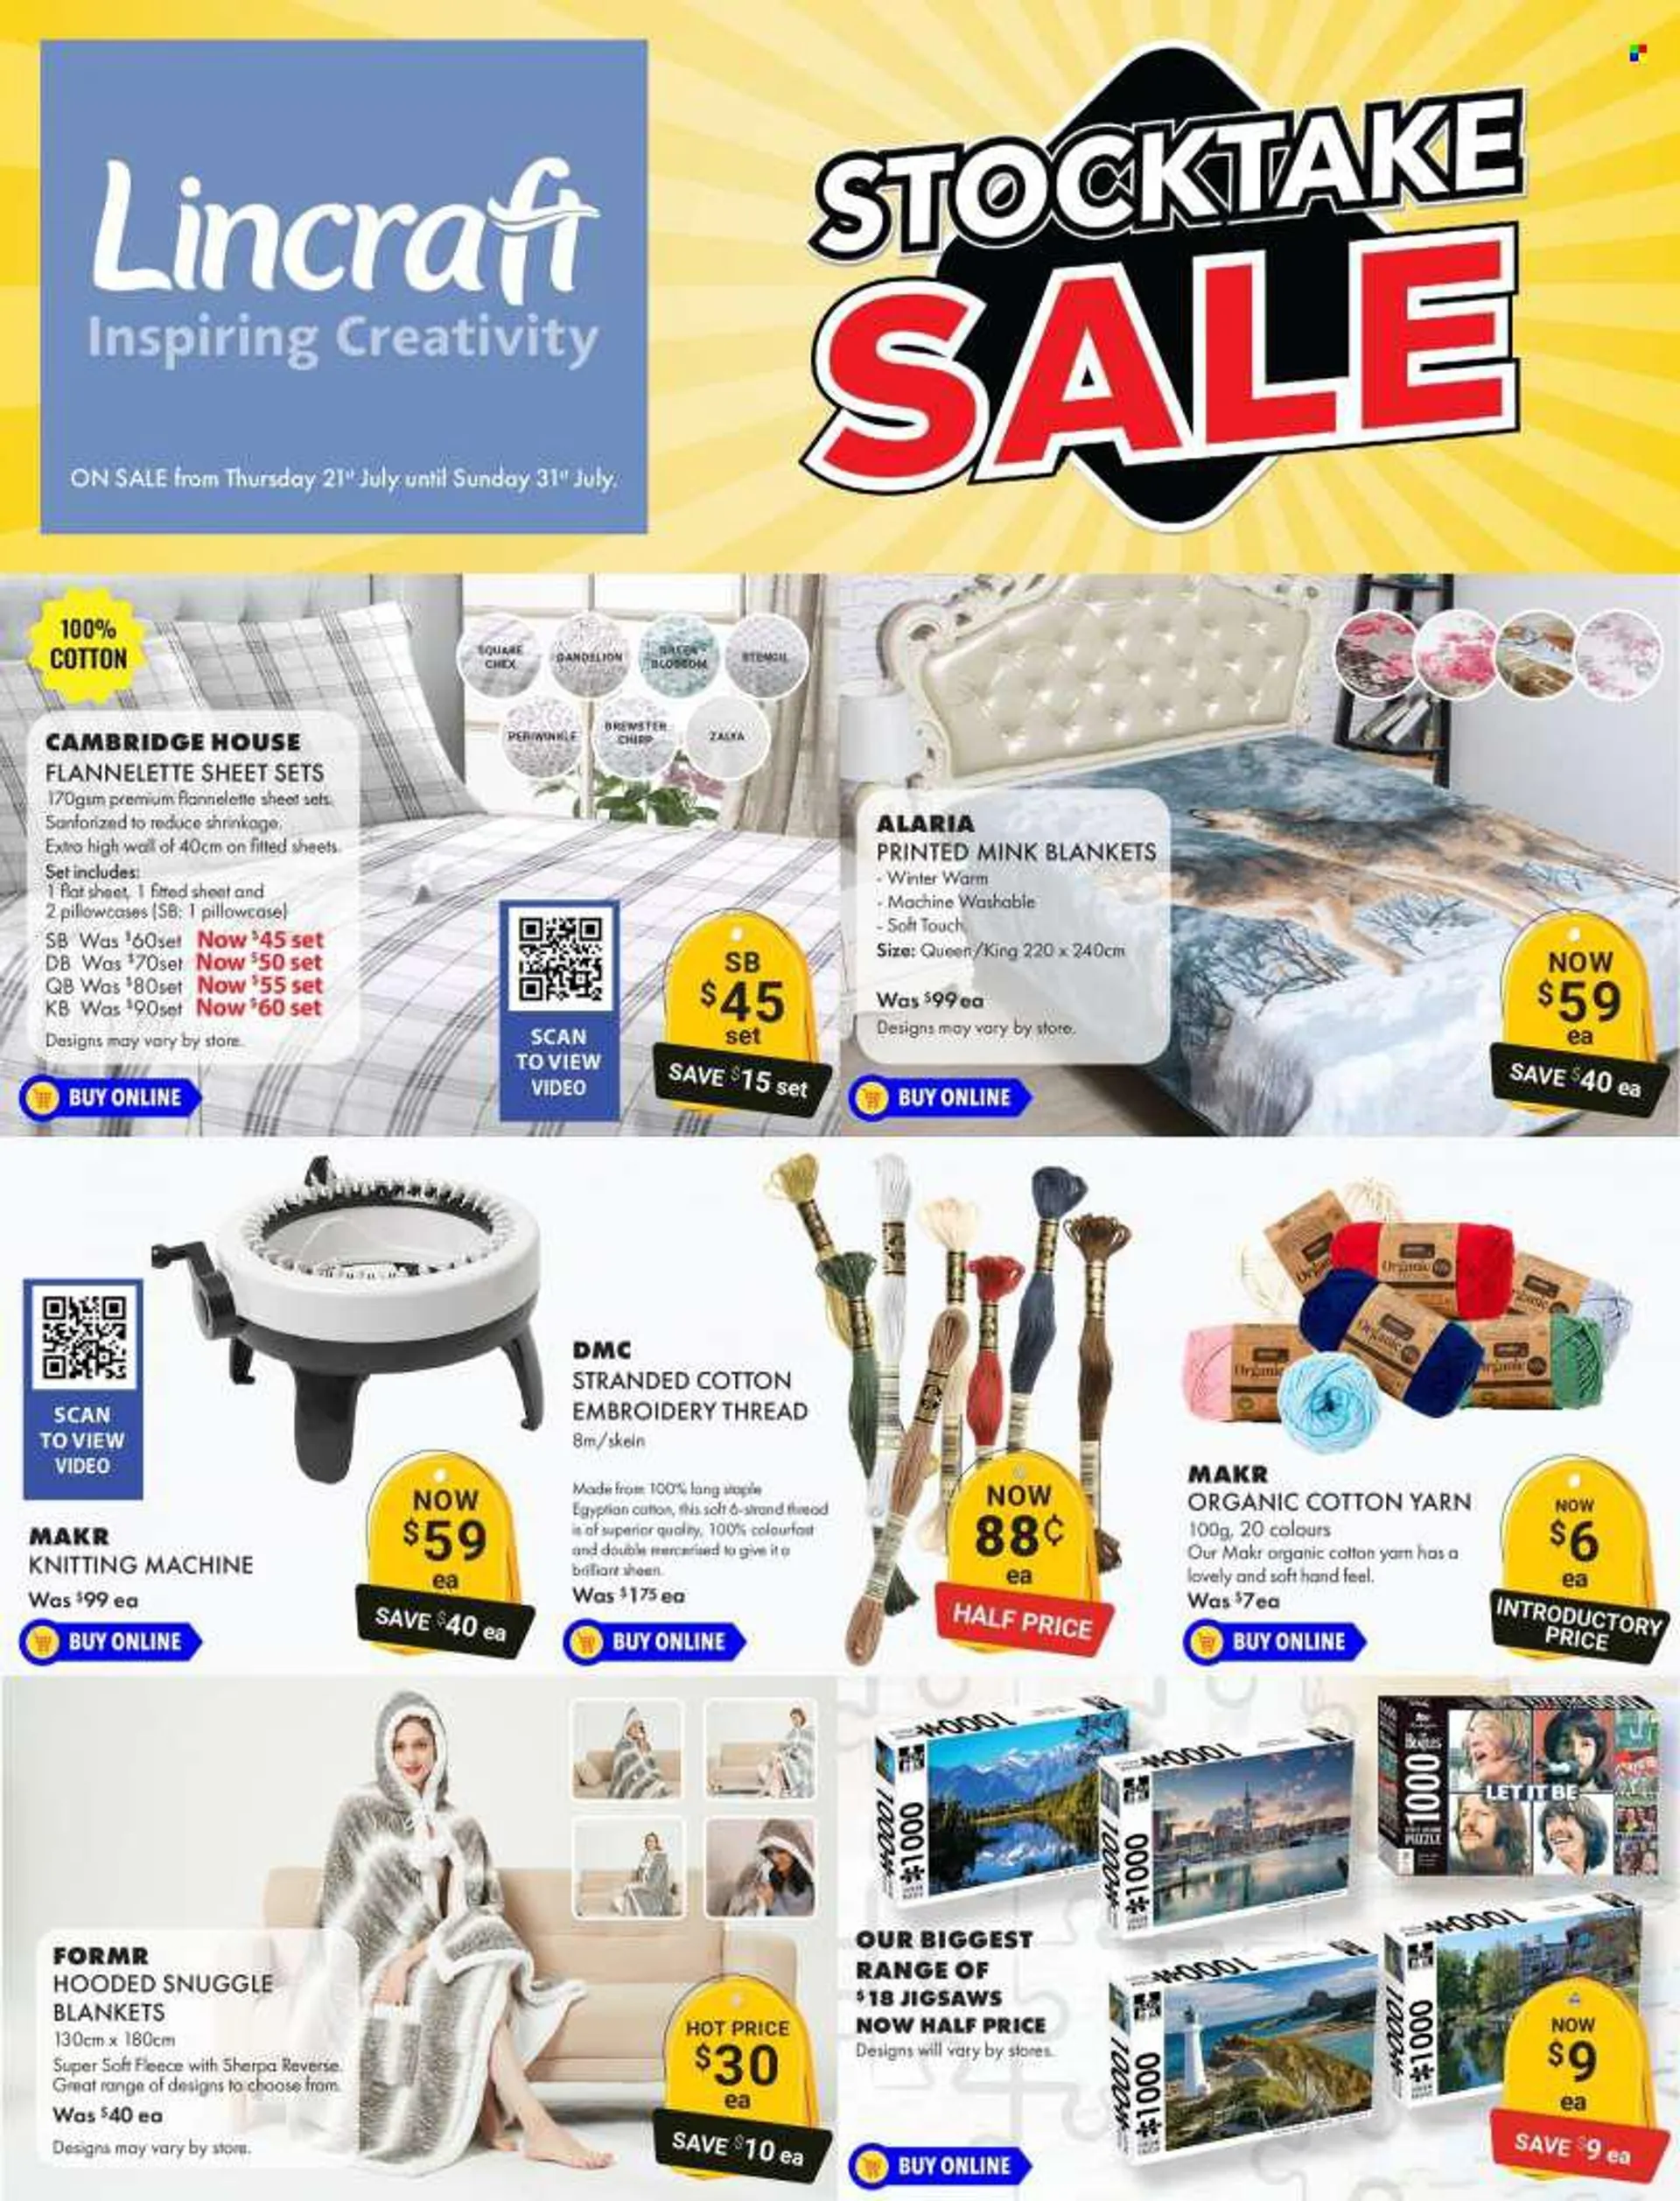 Lincraft mailer - 21.07.2022 - 31.07.2022 - Sales products - knitting wool, blanket, pillowcases, flannelette sheets. Page 1.